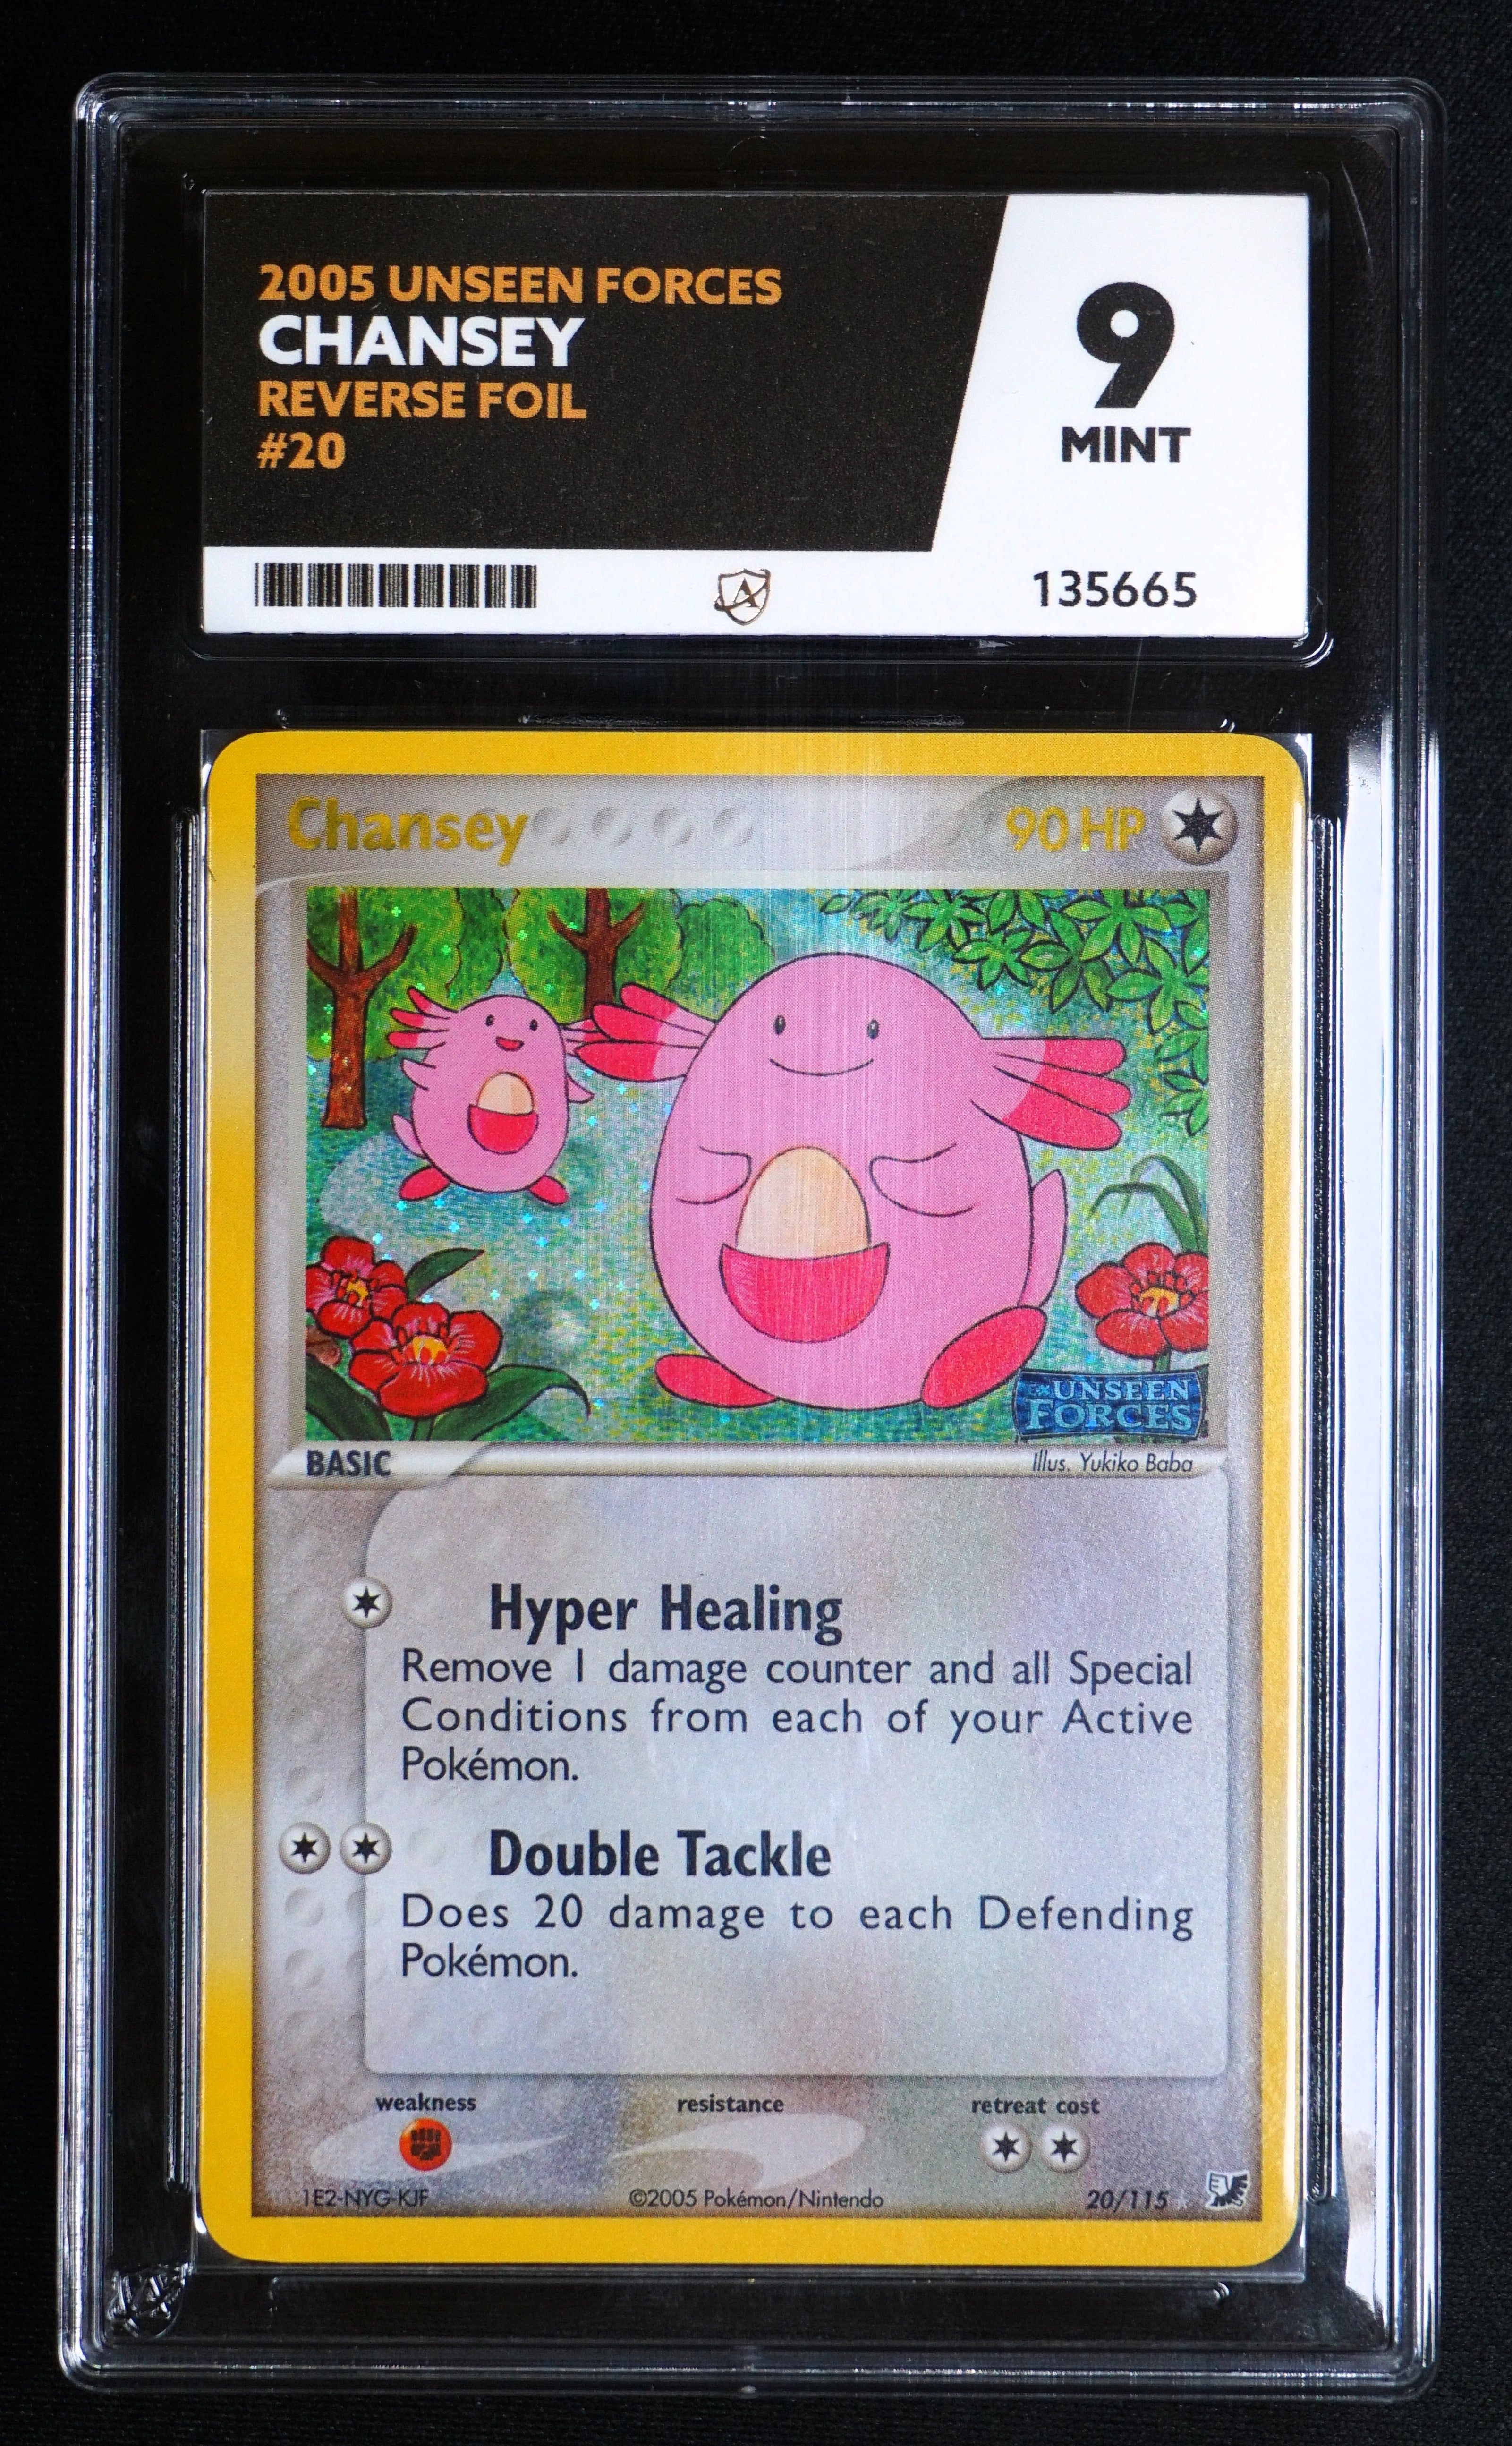 ACE 9 Chansey 20/115 - EX Unseen Forces - Reverse Holo